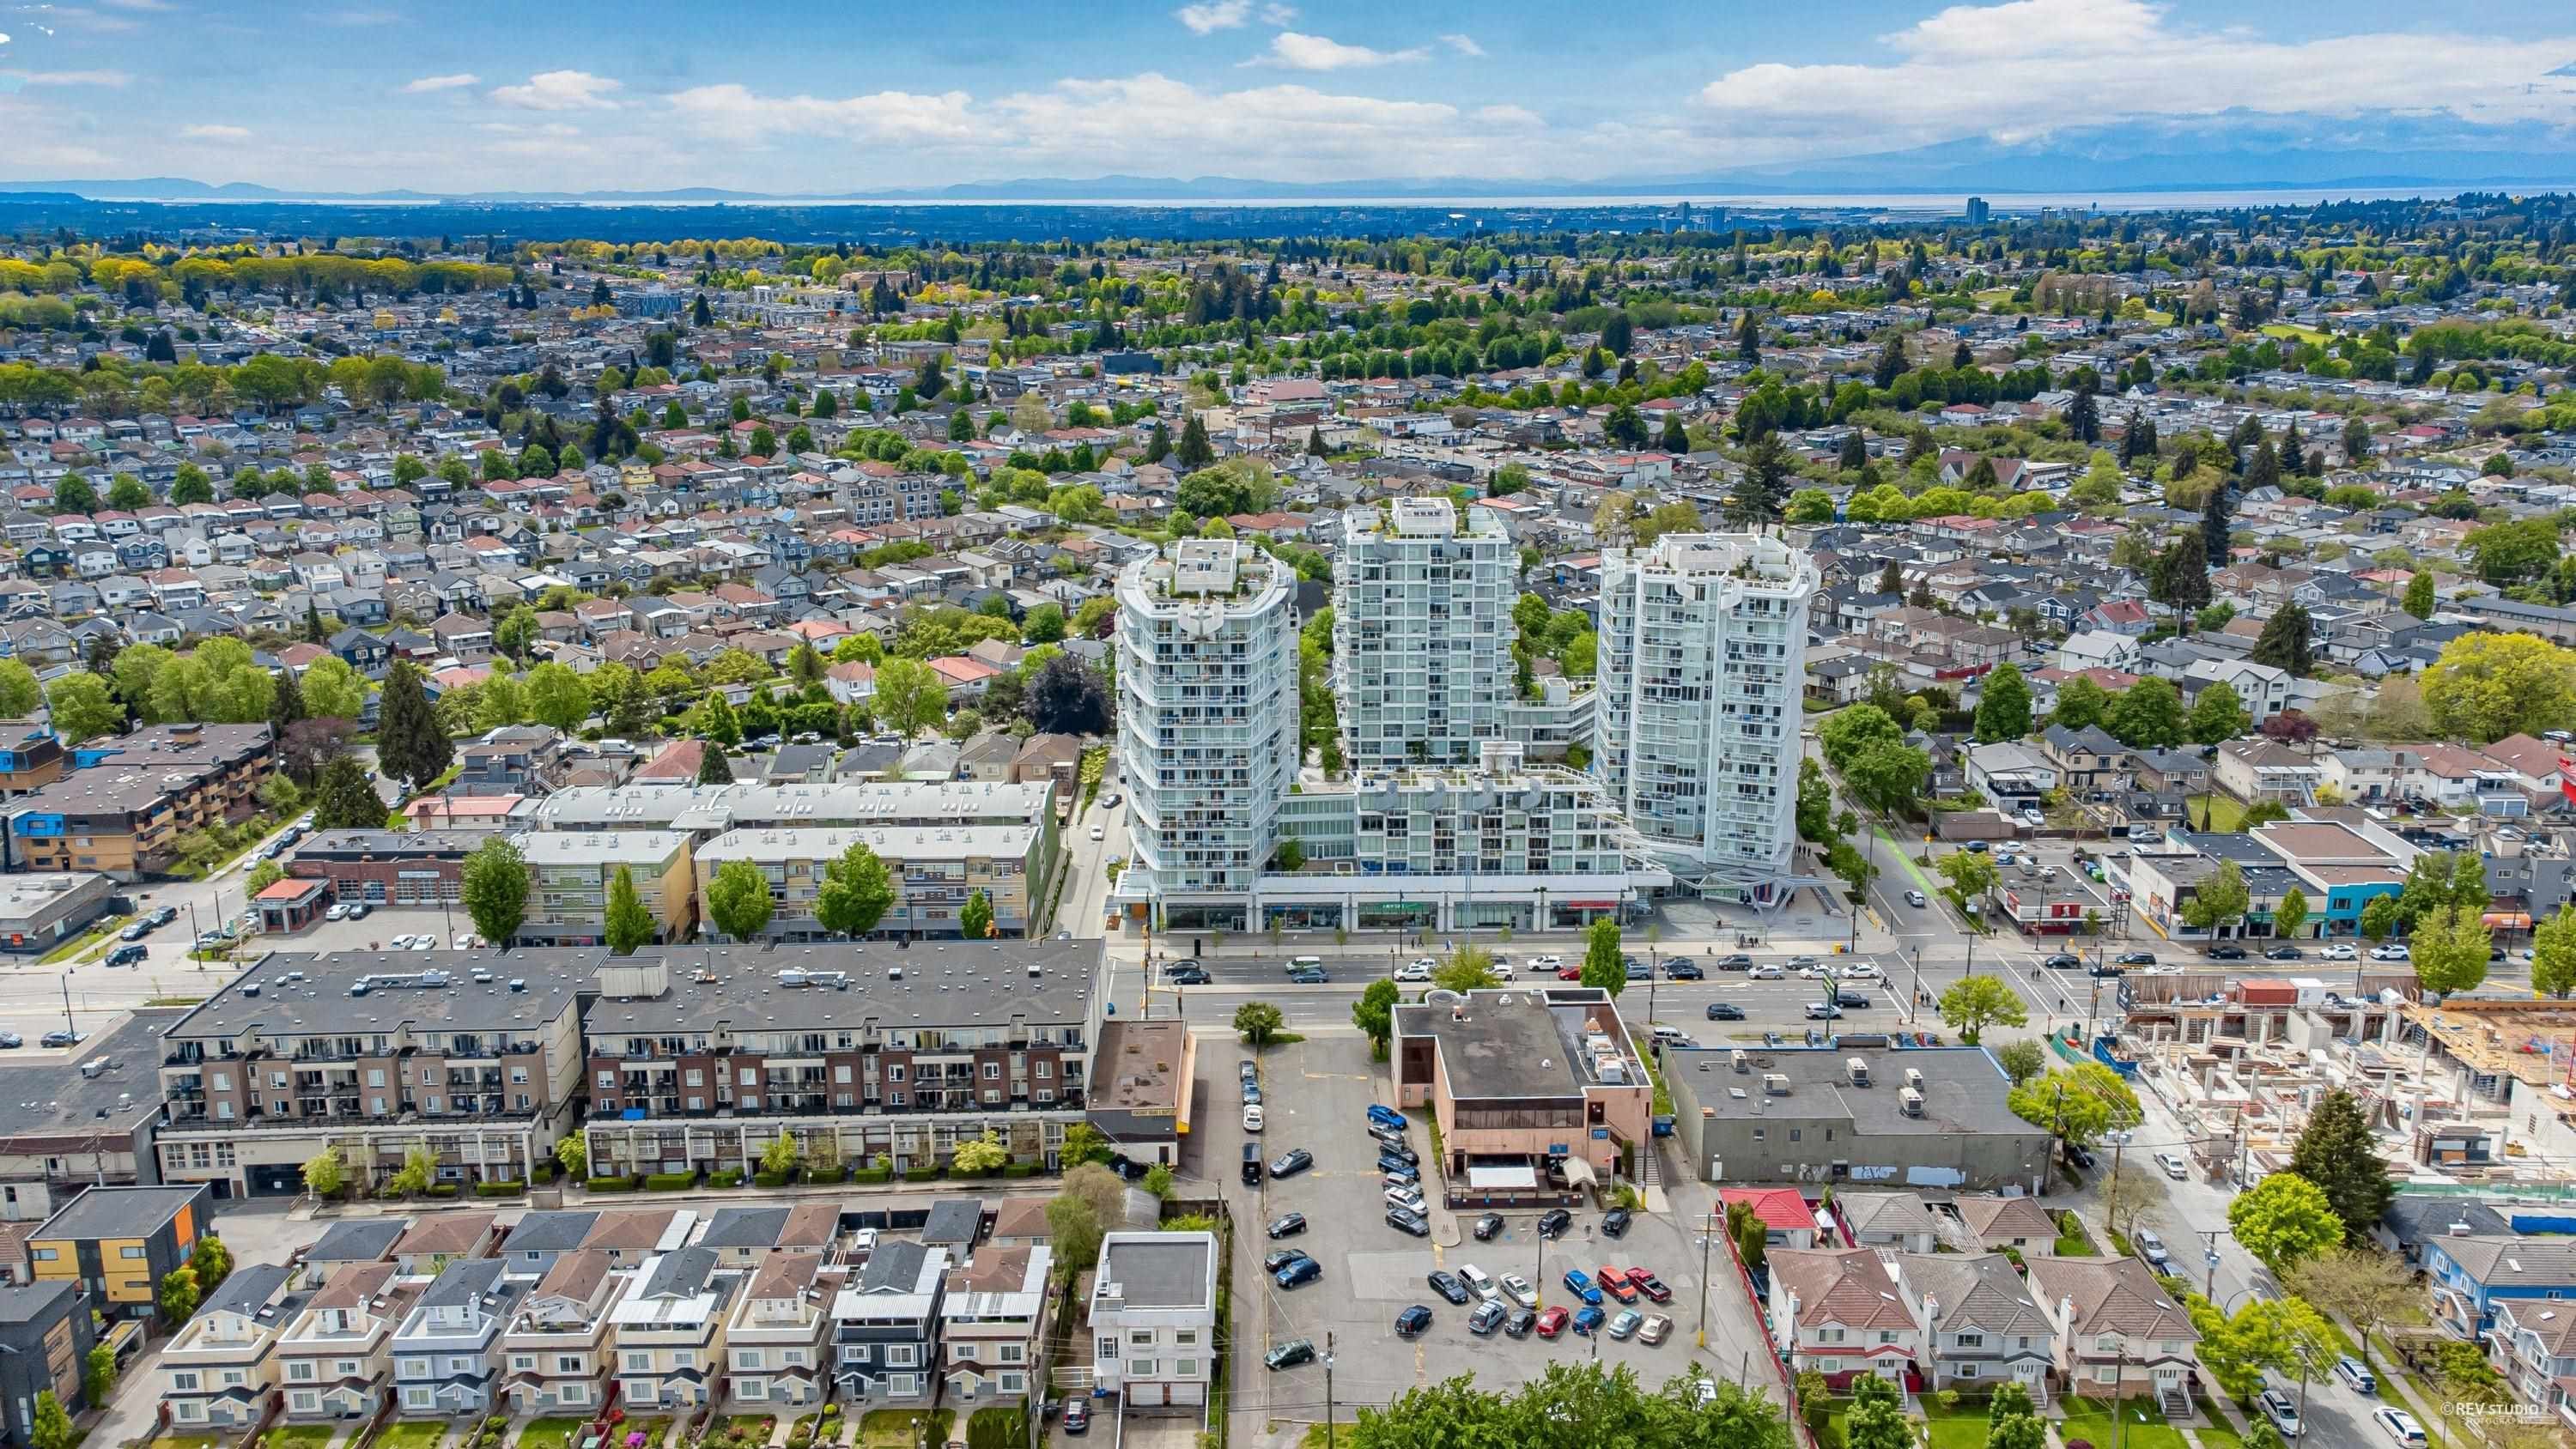 Main Photo: 2219 KINGSWAY in Vancouver: Victoria VE Land Commercial for sale (Vancouver East)  : MLS®# C8057160